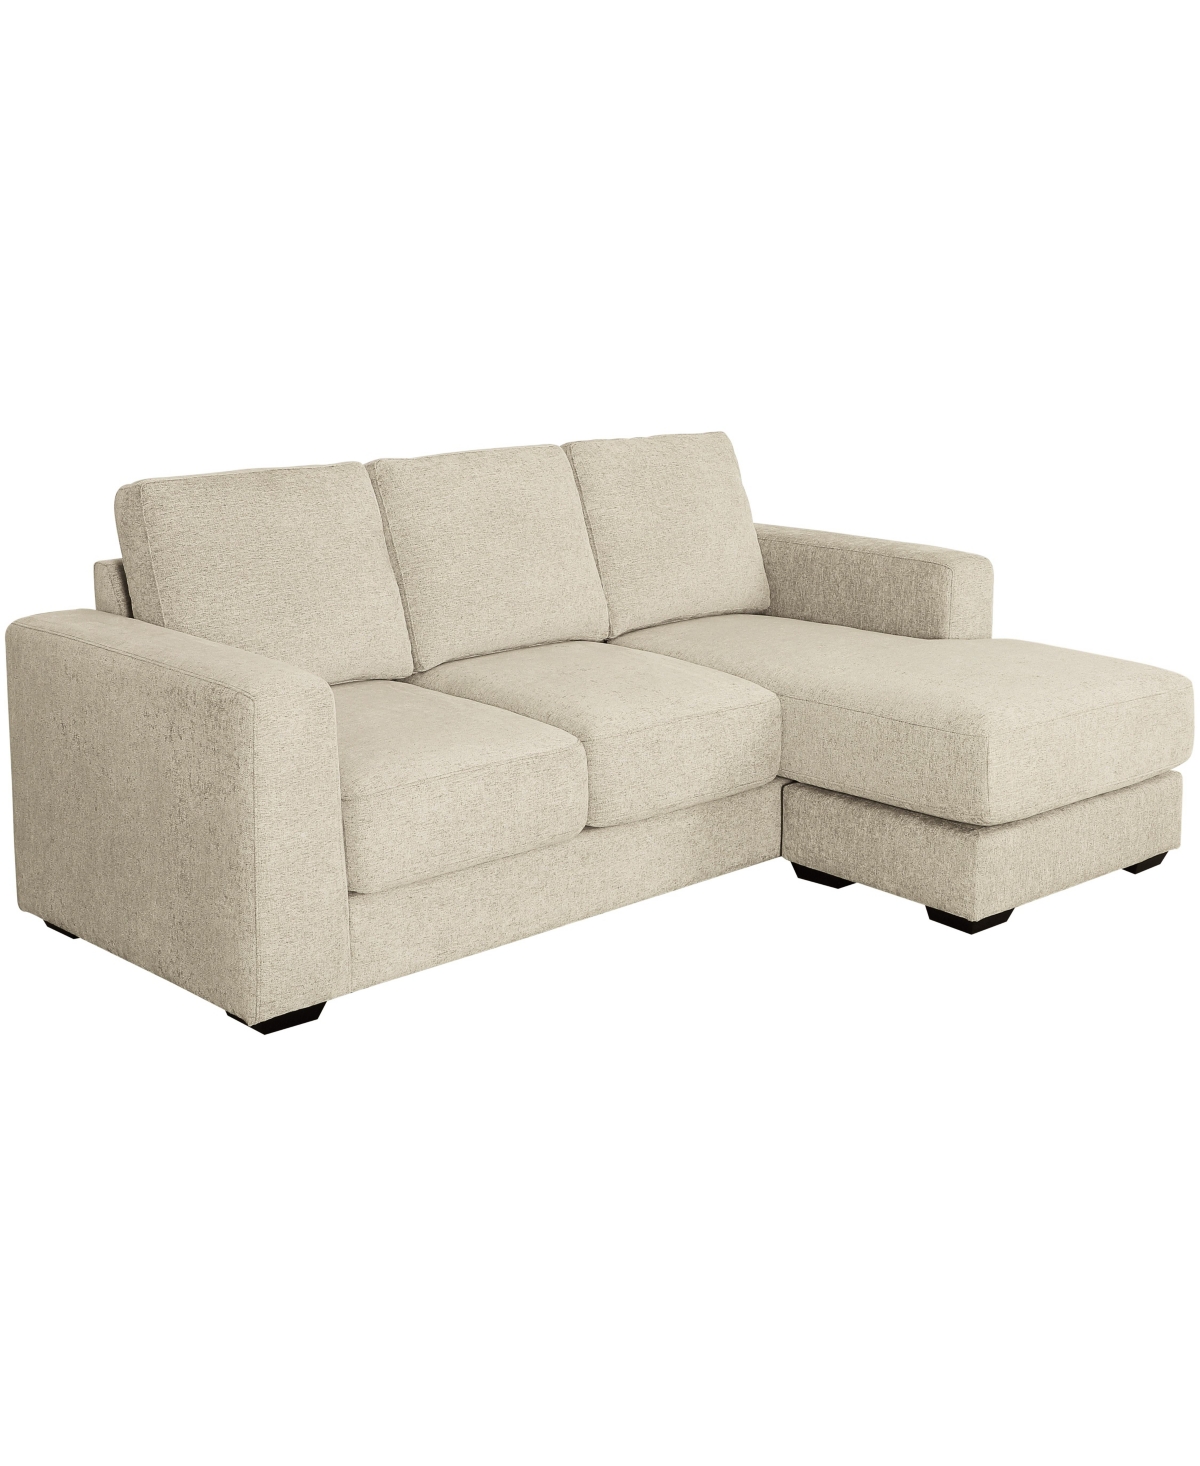 Abbyson Living Elizabeth 85" Stain-resistant Fabric Reversible Sofa Chaise Sectional In Sand